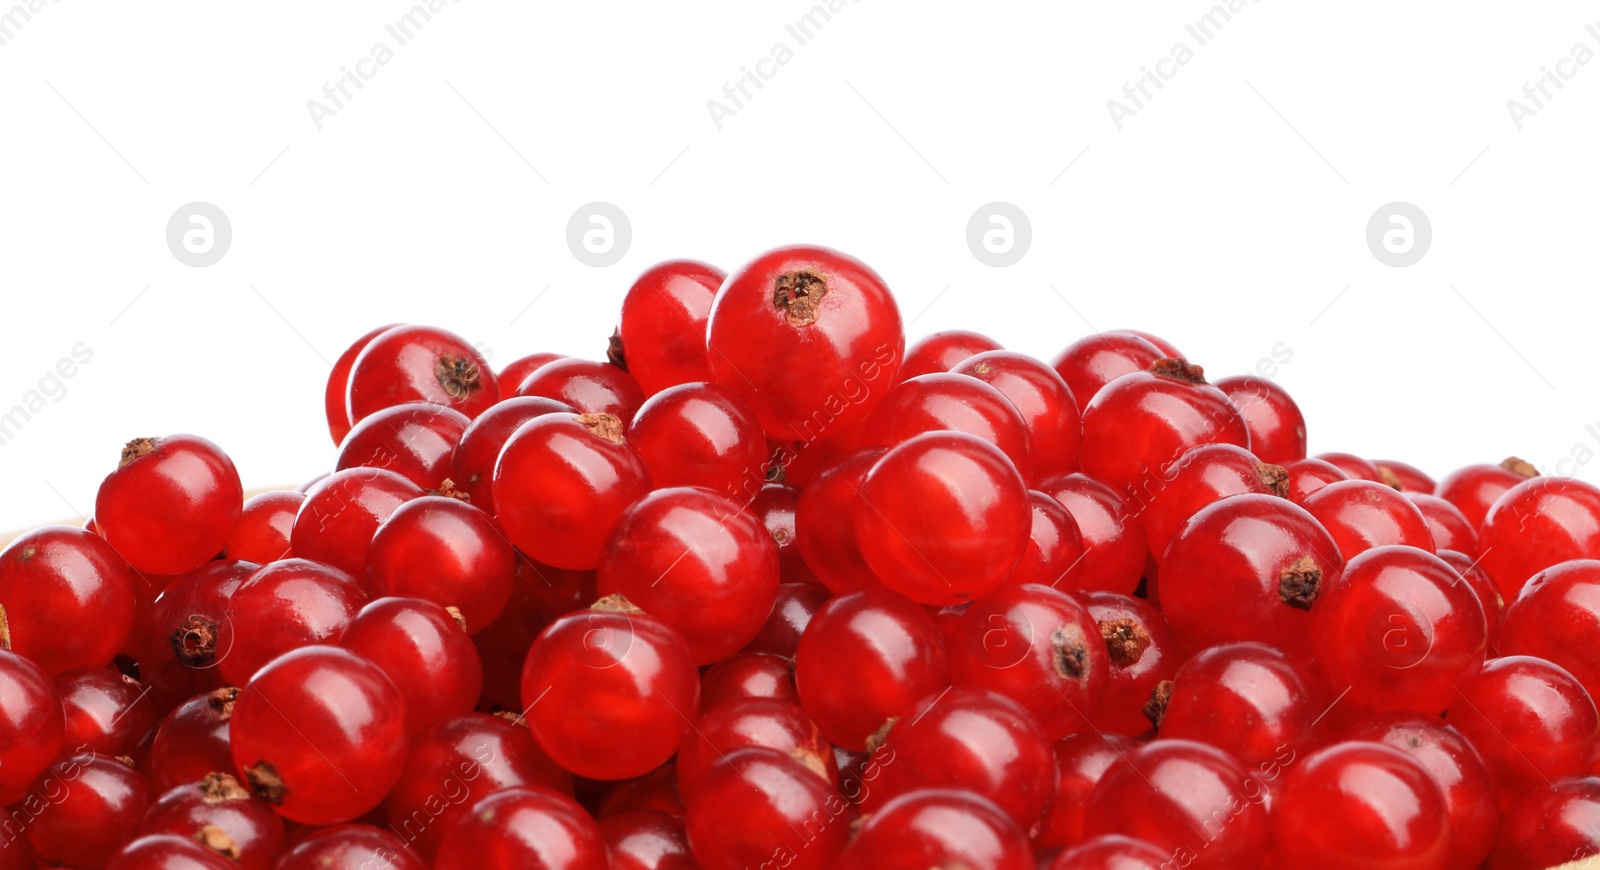 Photo of Many tasty fresh red currant berries isolated on white